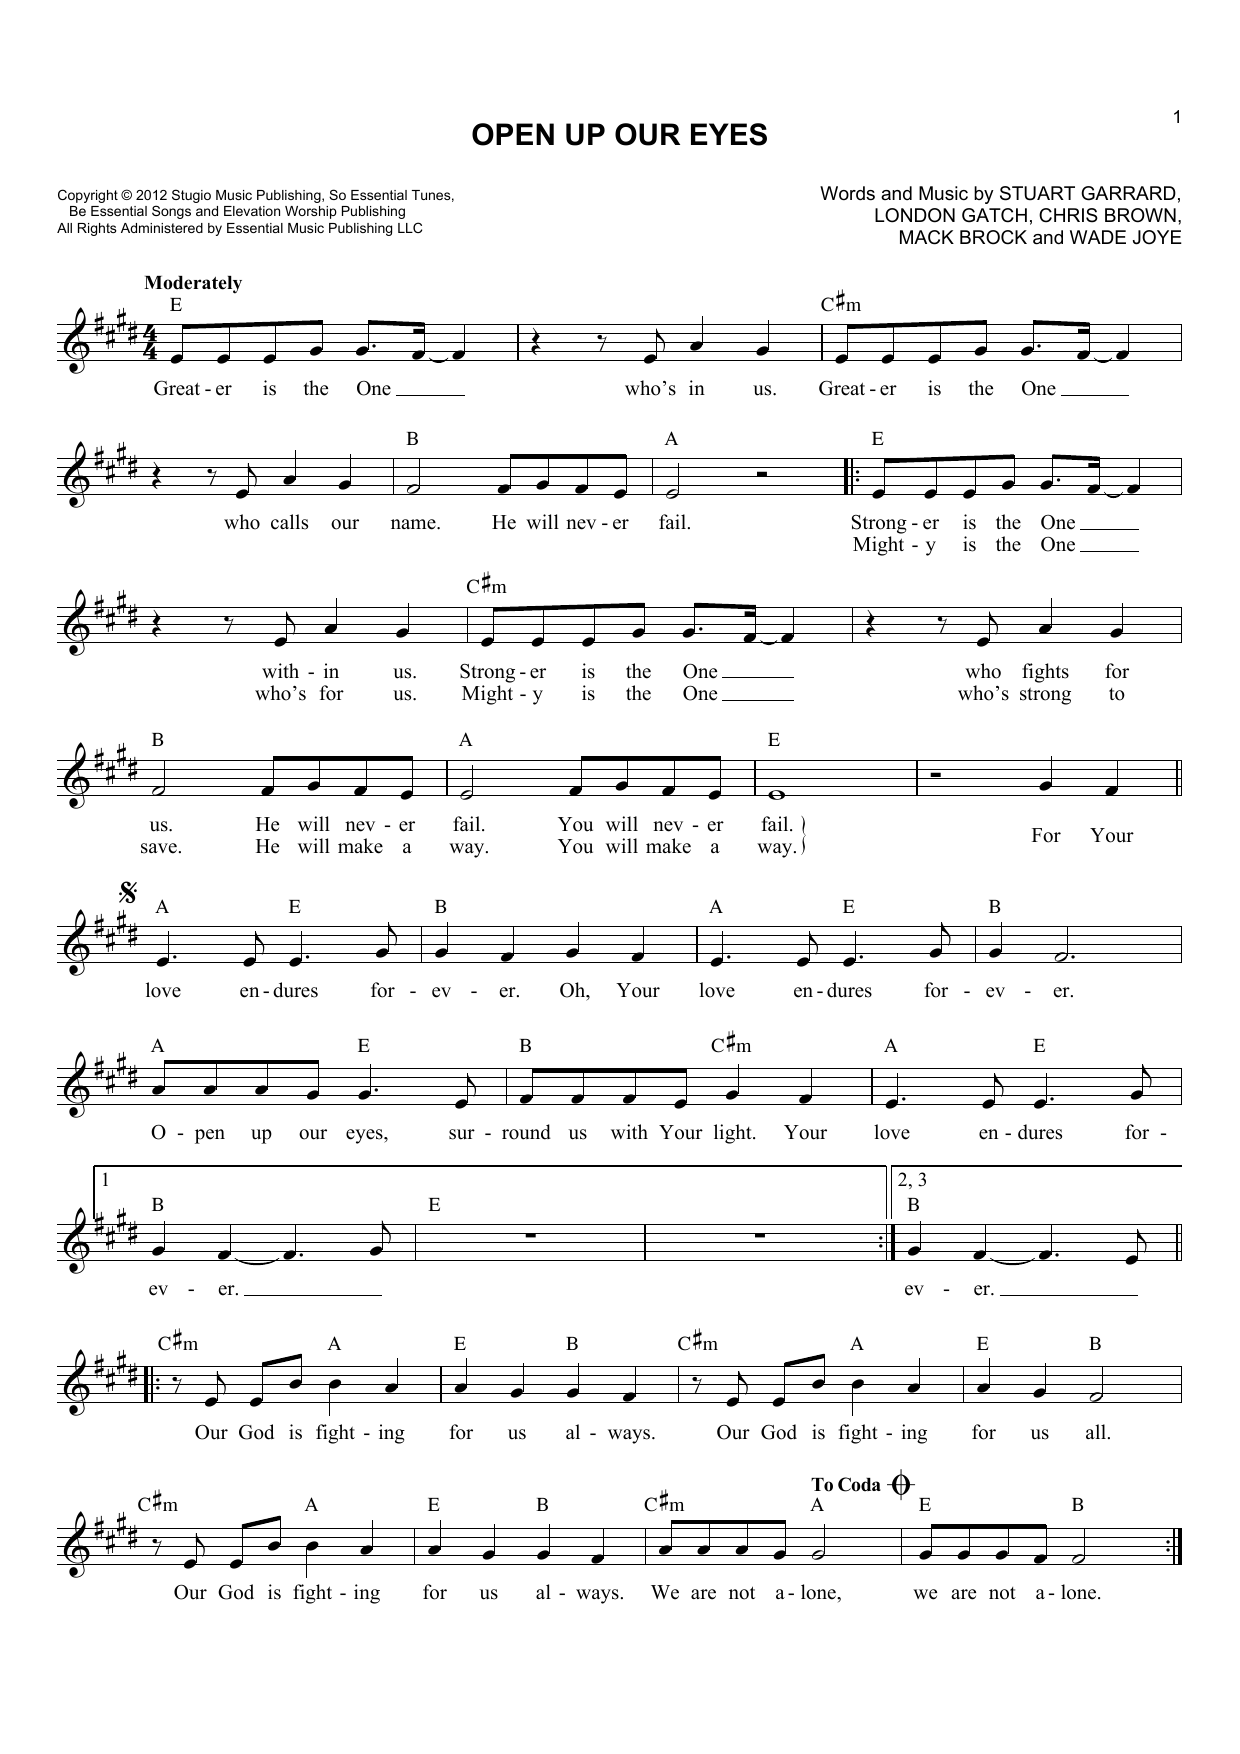 Elevation Worship Open Up Our Eyes sheet music notes and chords. Download Printable PDF.